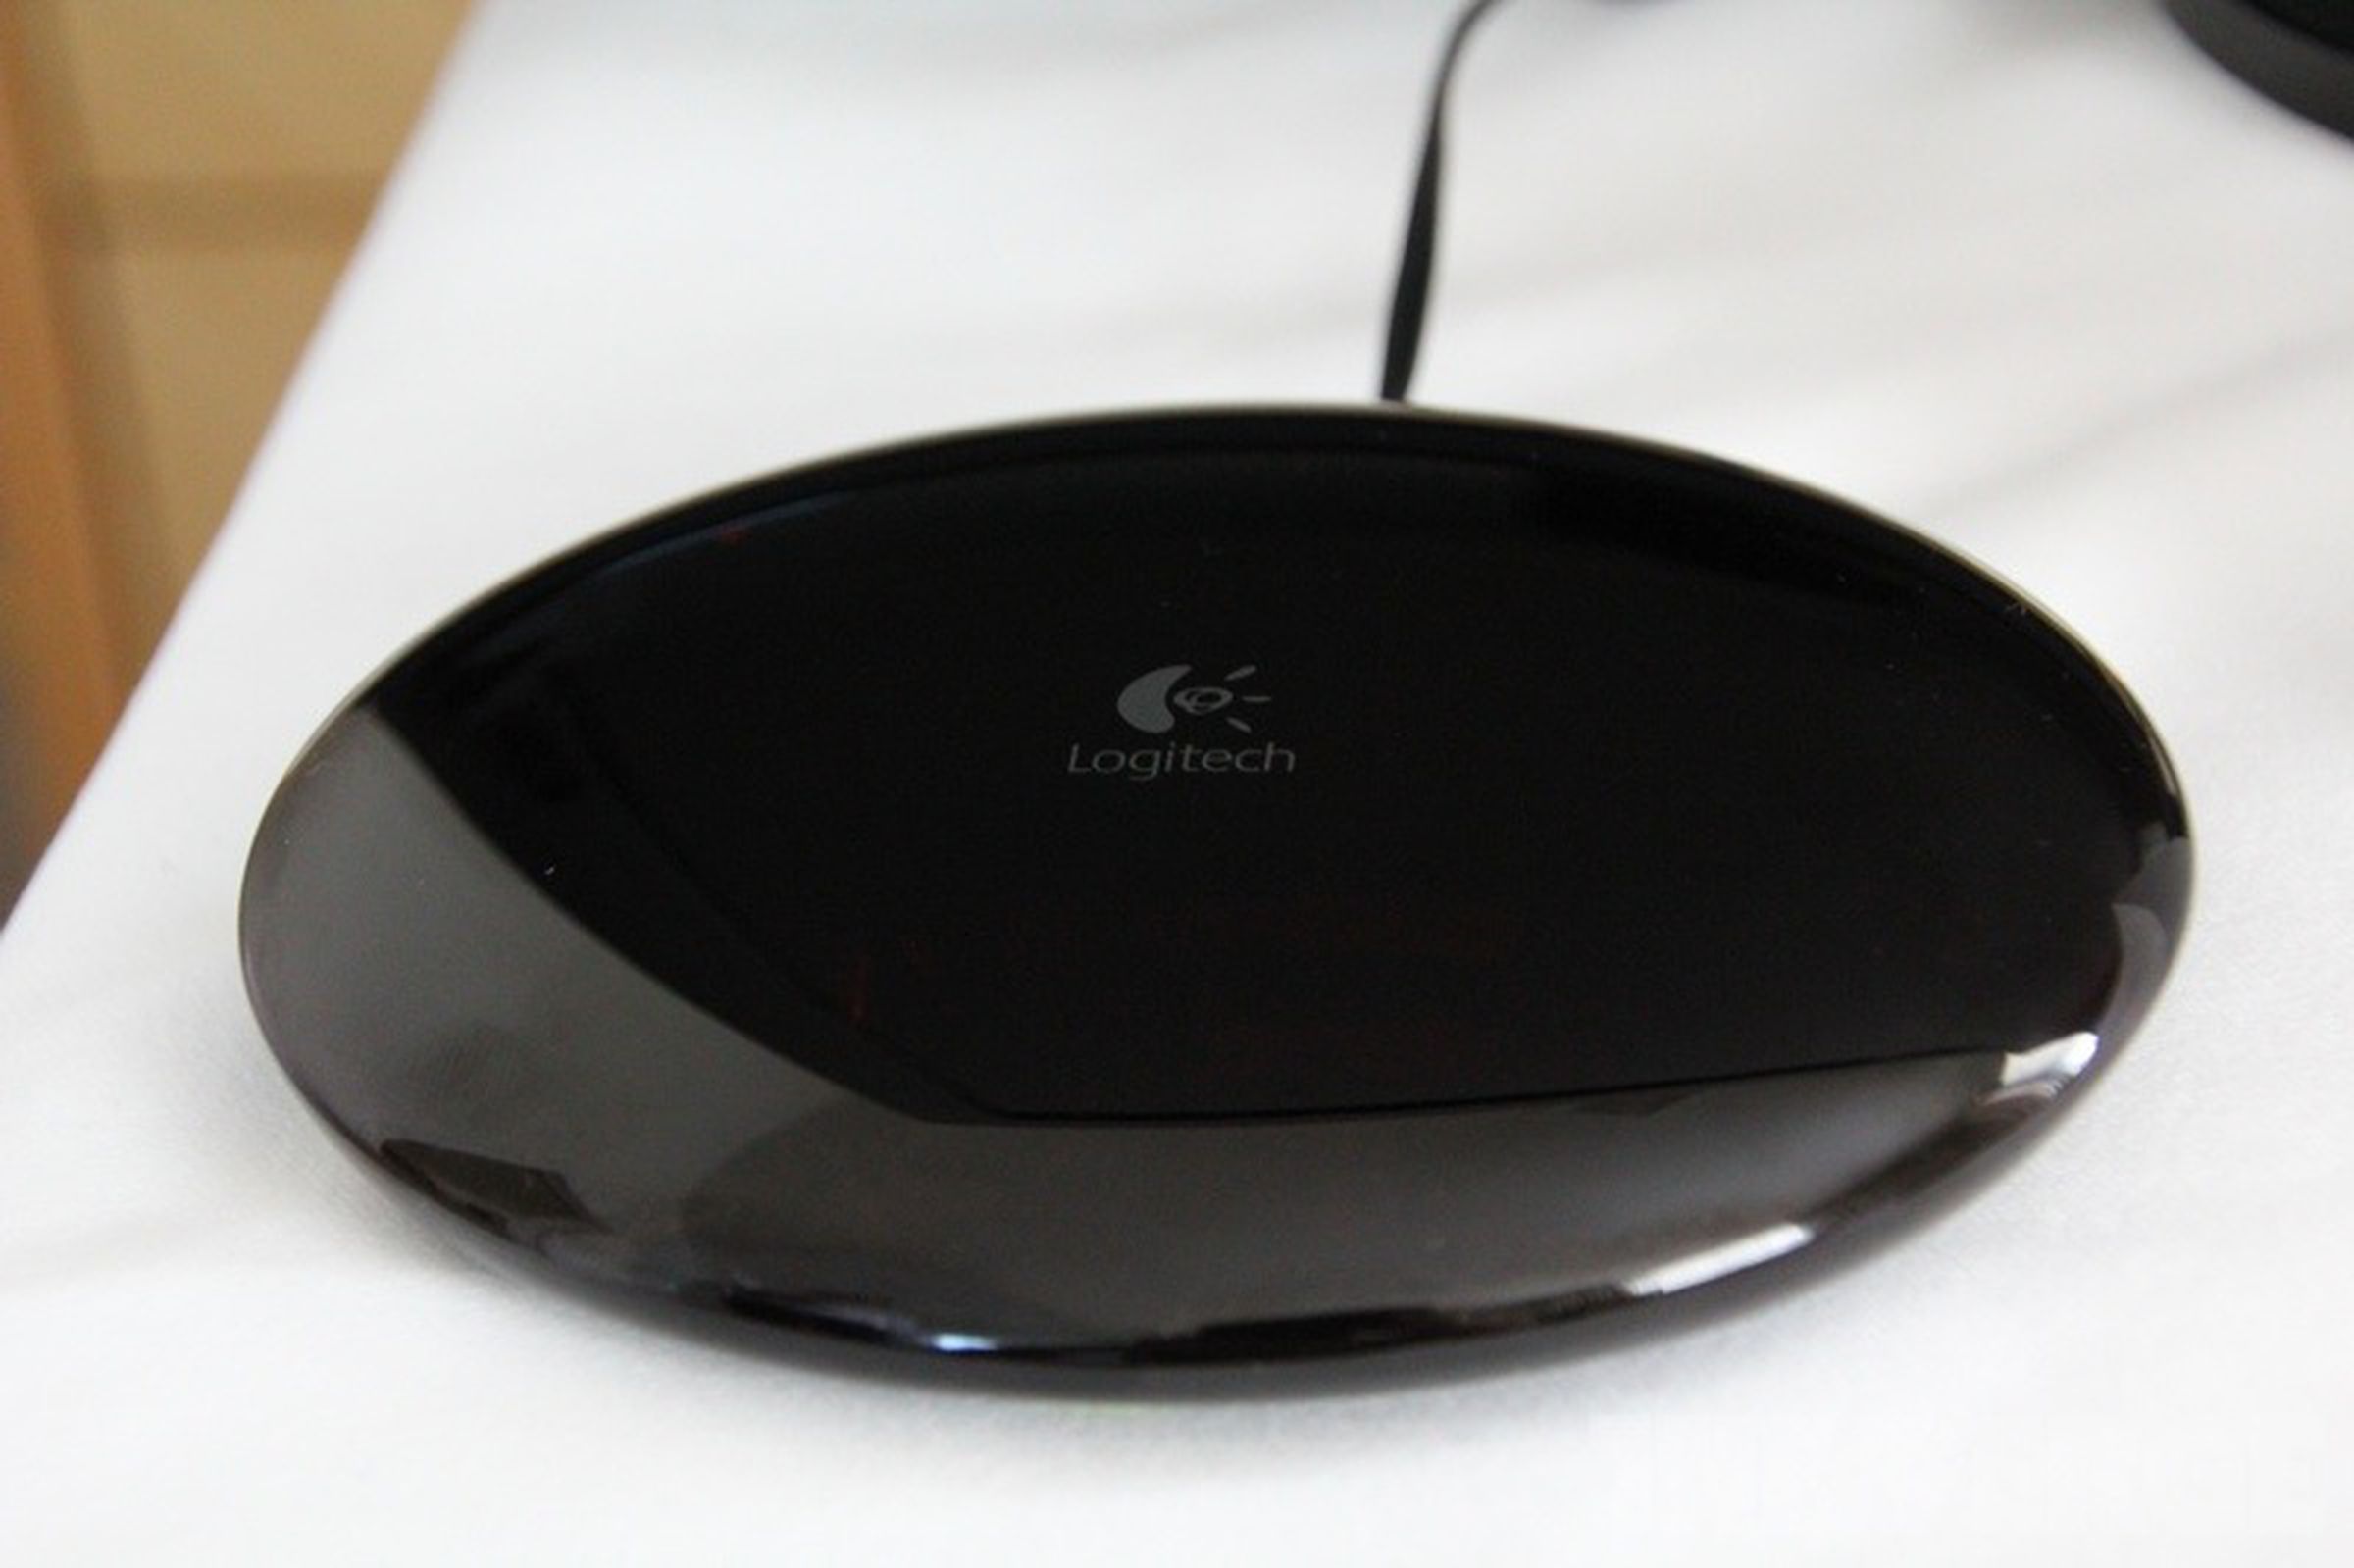 Logitech Harmony Link: hands-on pictures